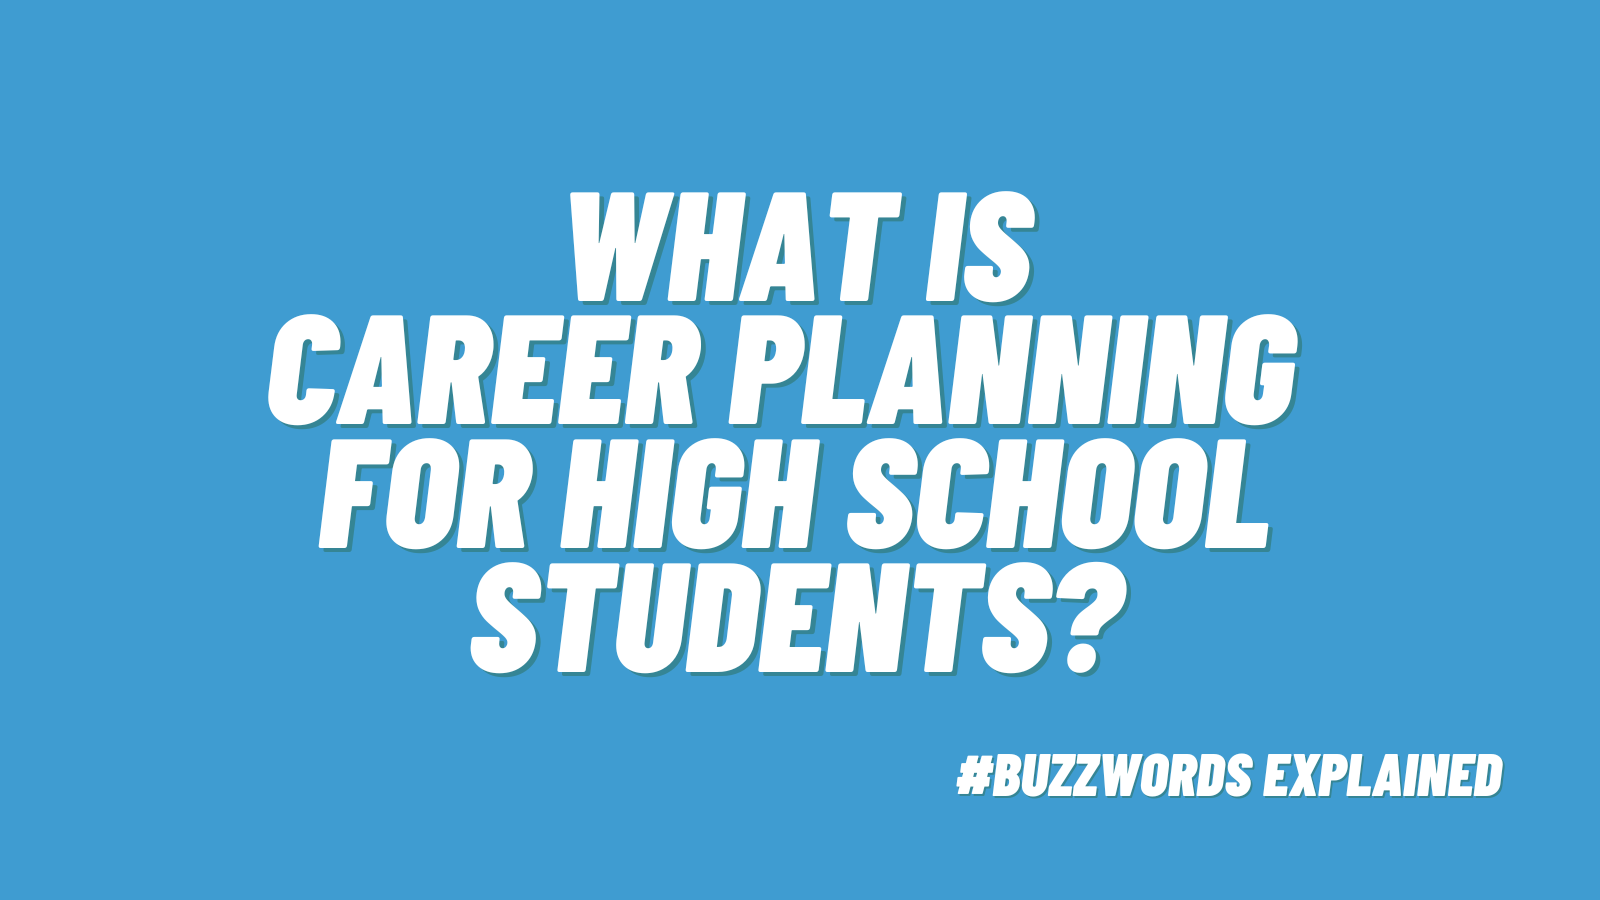 What Is Career Planning for High School Students?